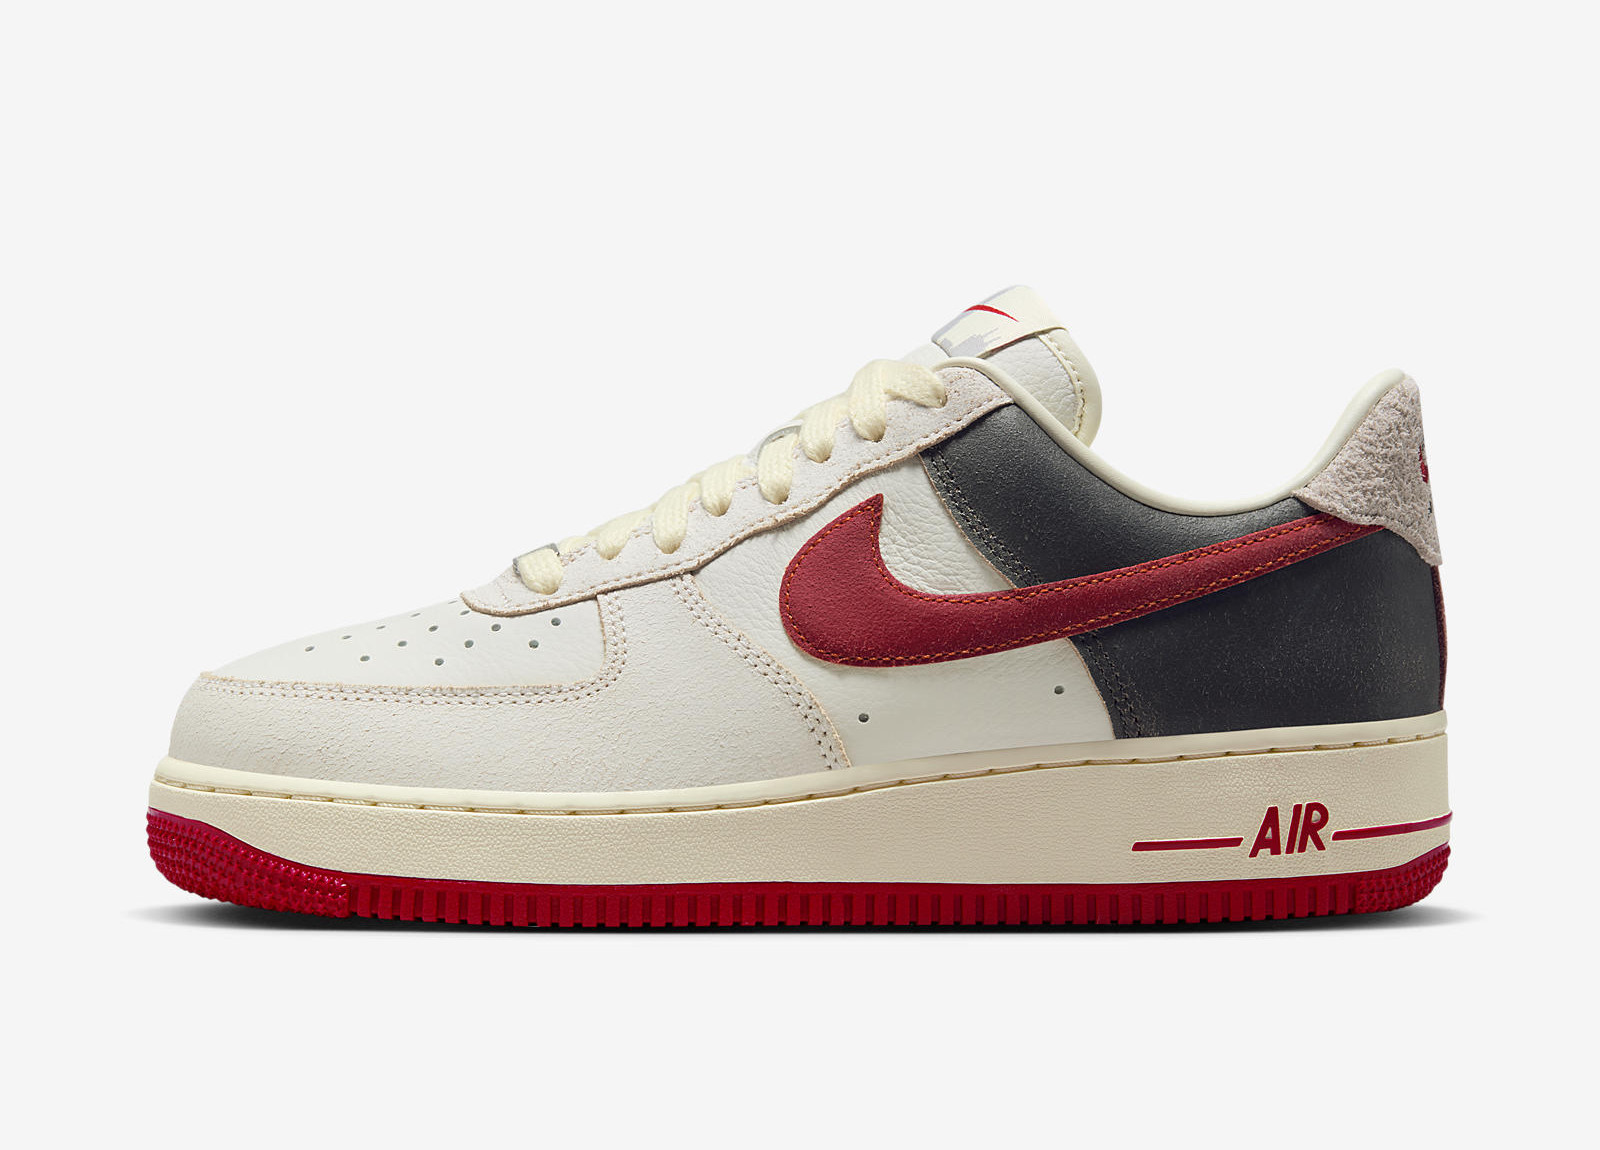 Nike Air Force 1 07
« Chicago »